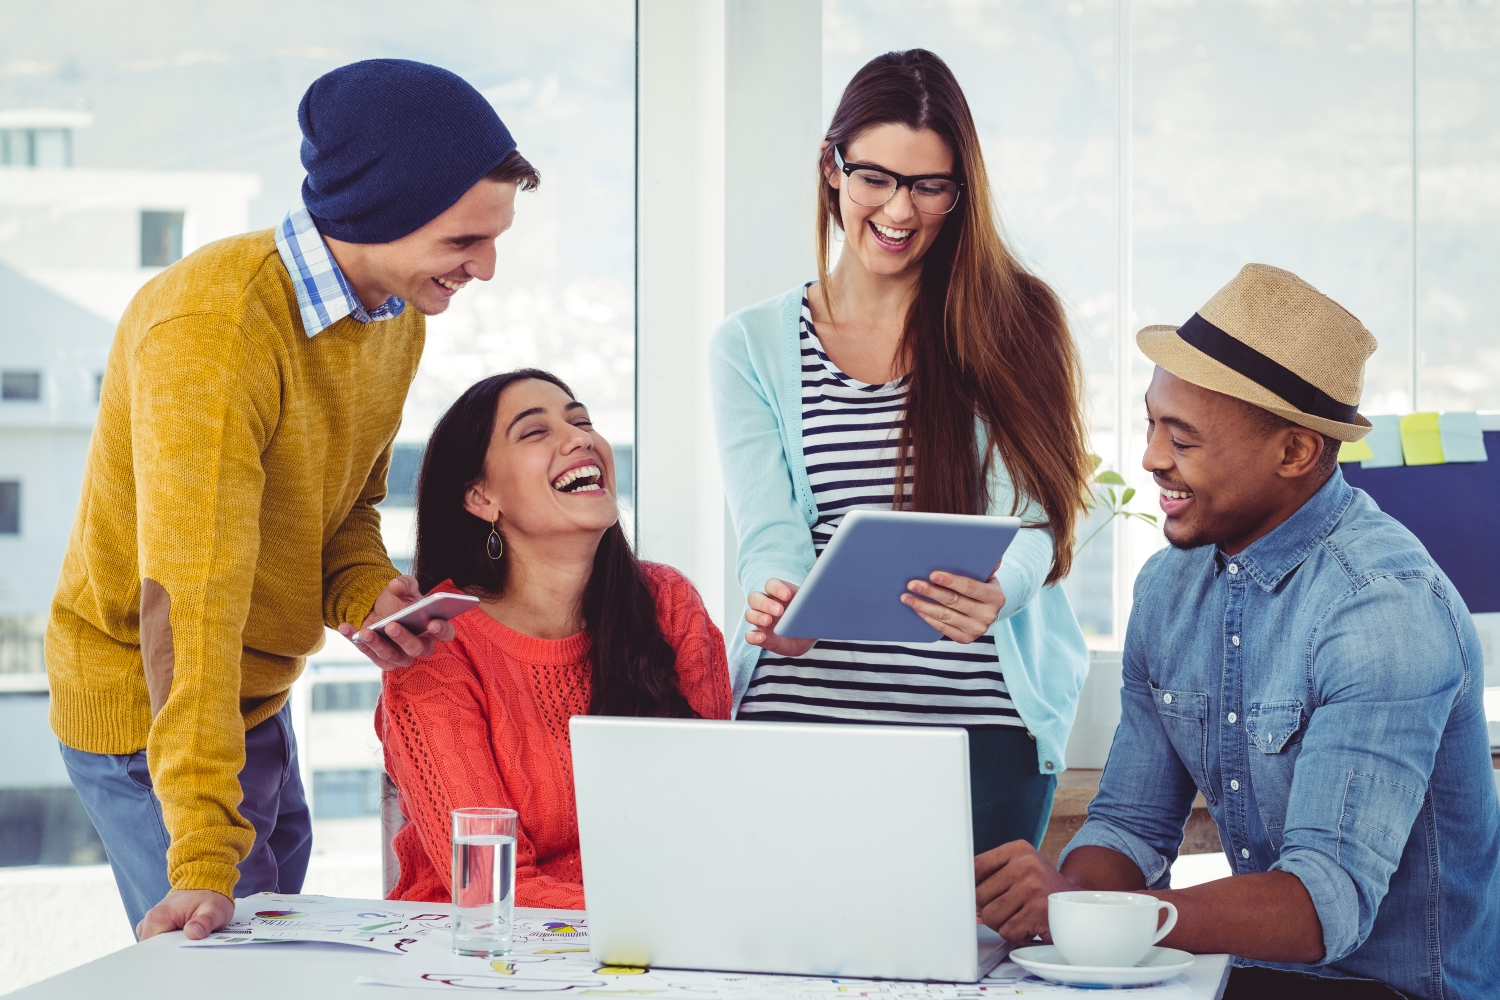 Portraying Your Positive Company Culture on Social Media